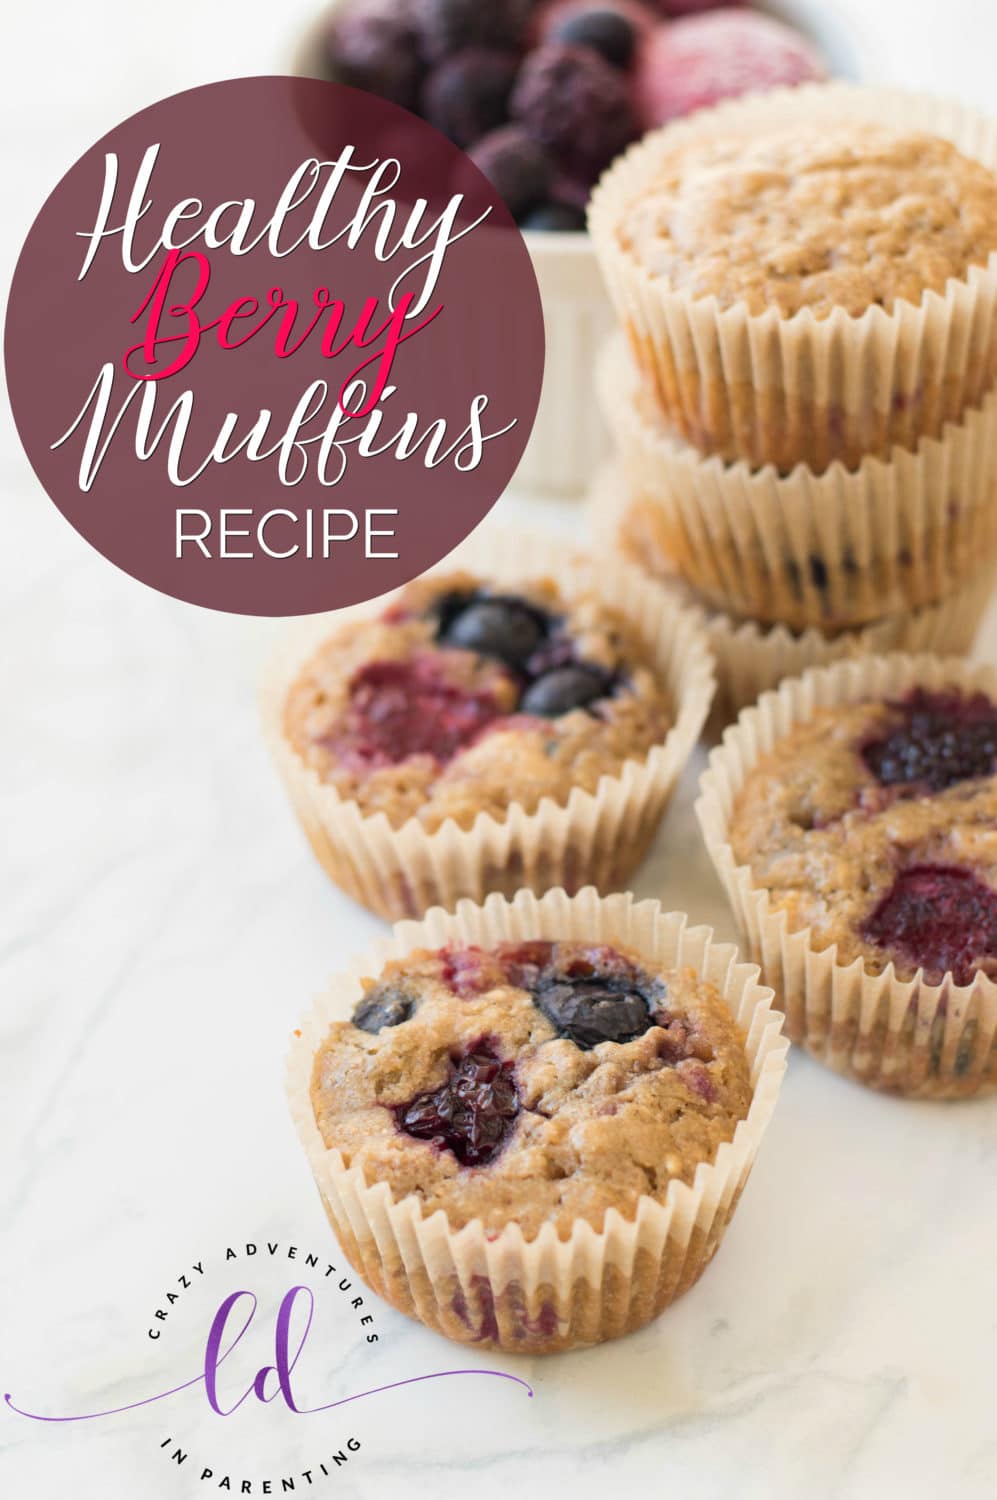 Healthy Berry Muffins Recipe